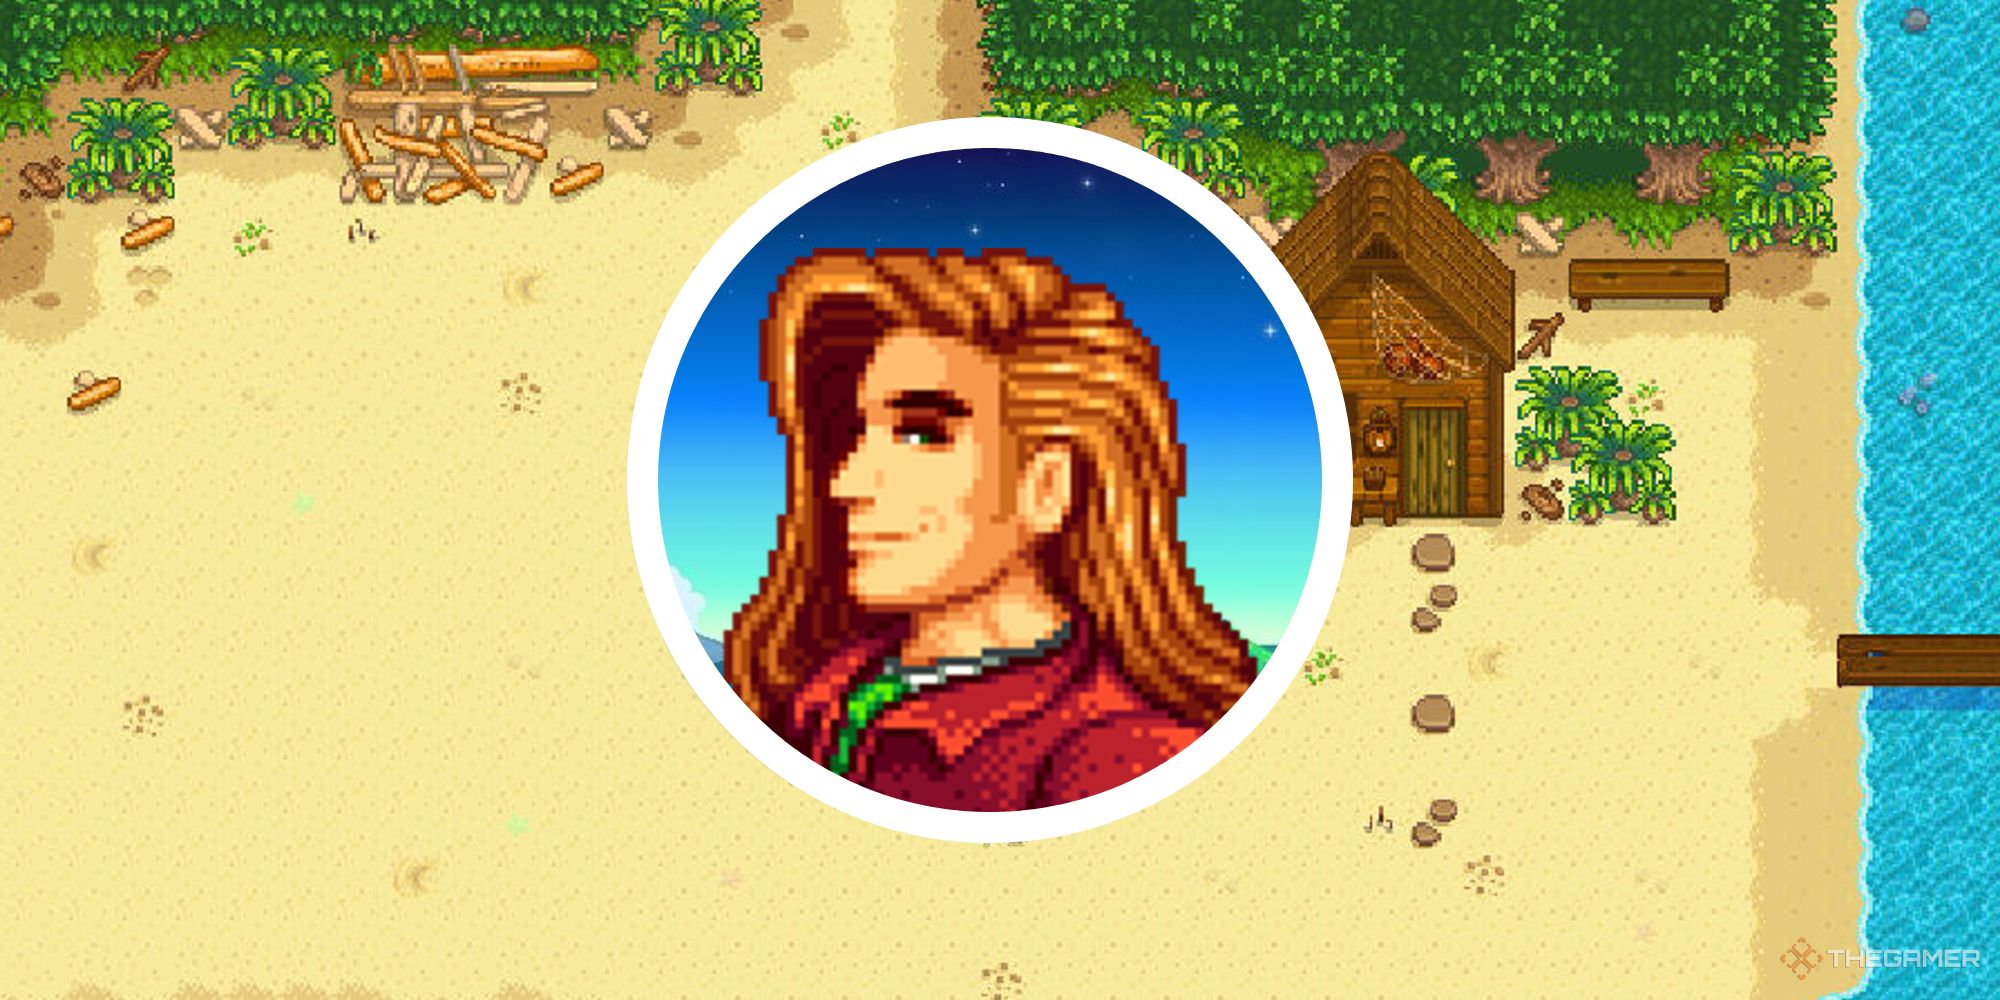 stardew valley circle image of elliot over background of beach area